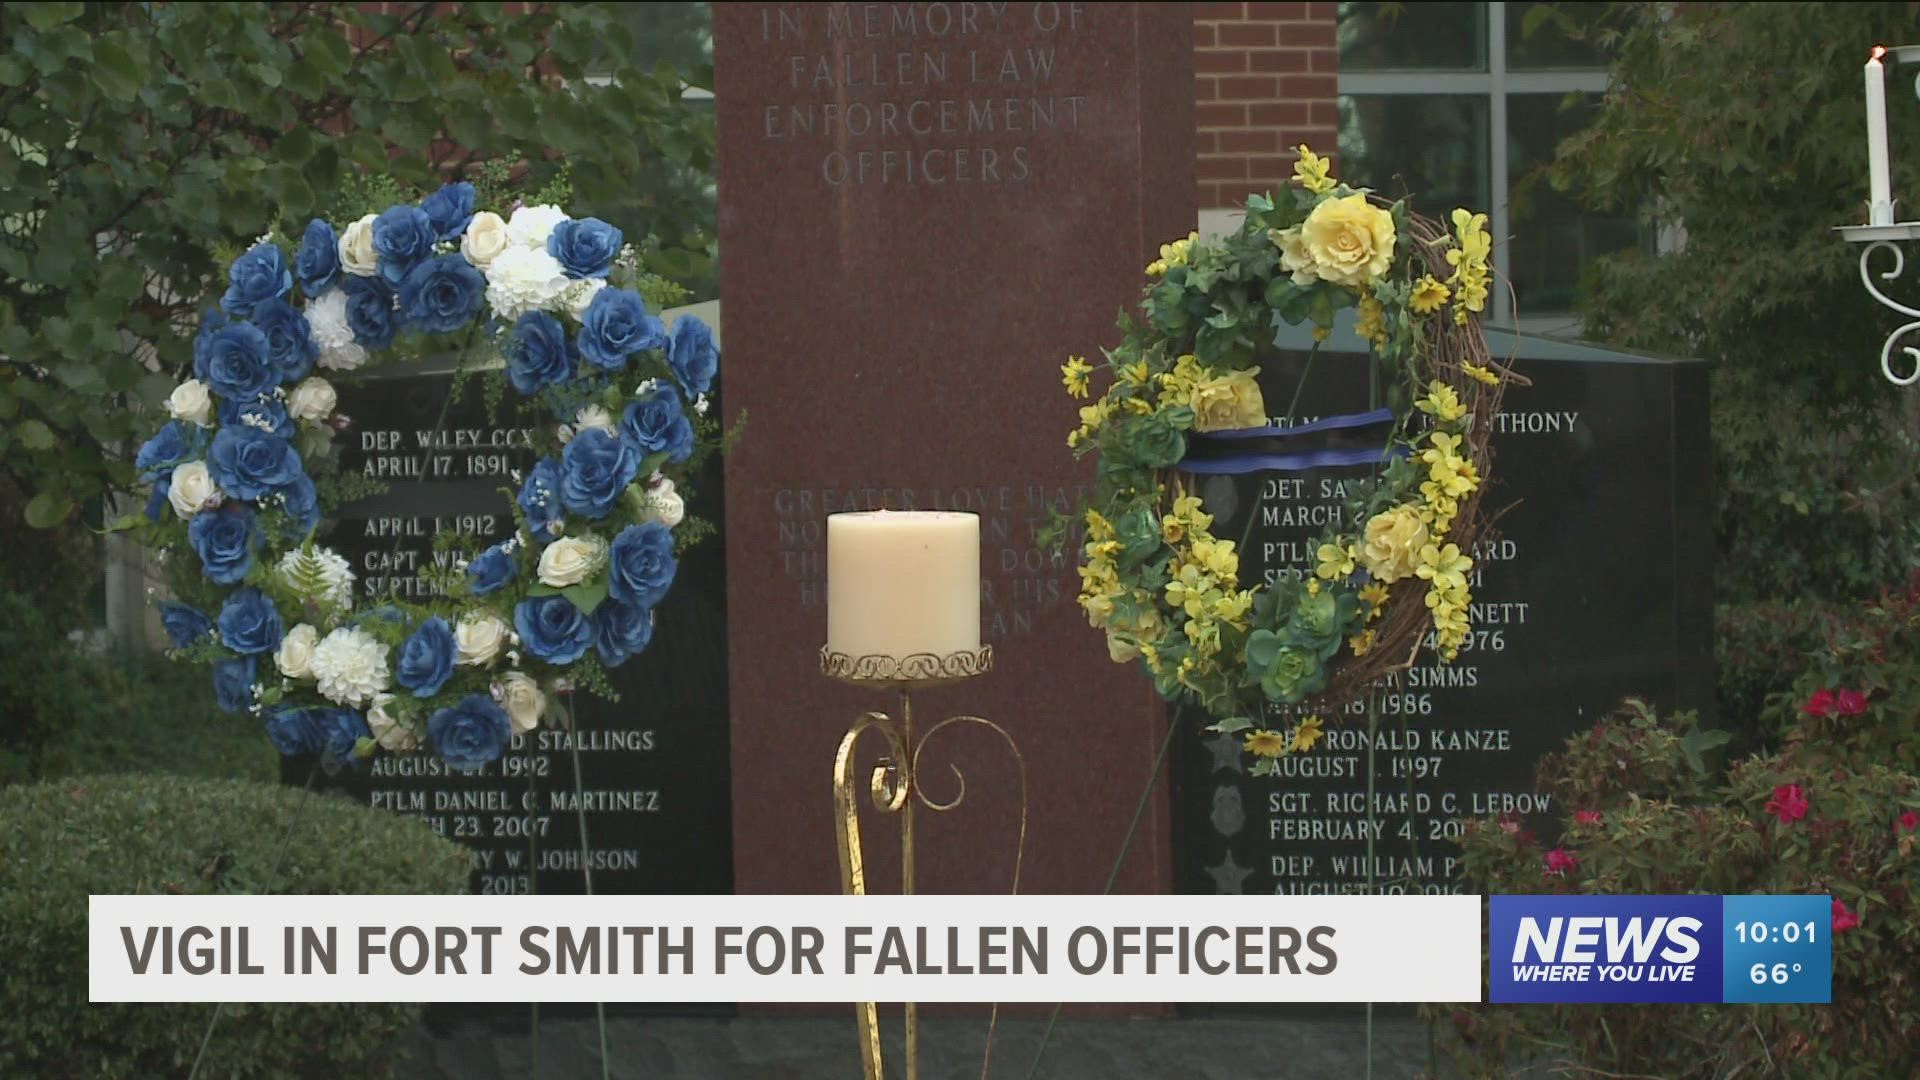 On Thursday, Oct. 14, Sebastian County residents gathered in Fort Smith to honor the lives of those killed while on duty.